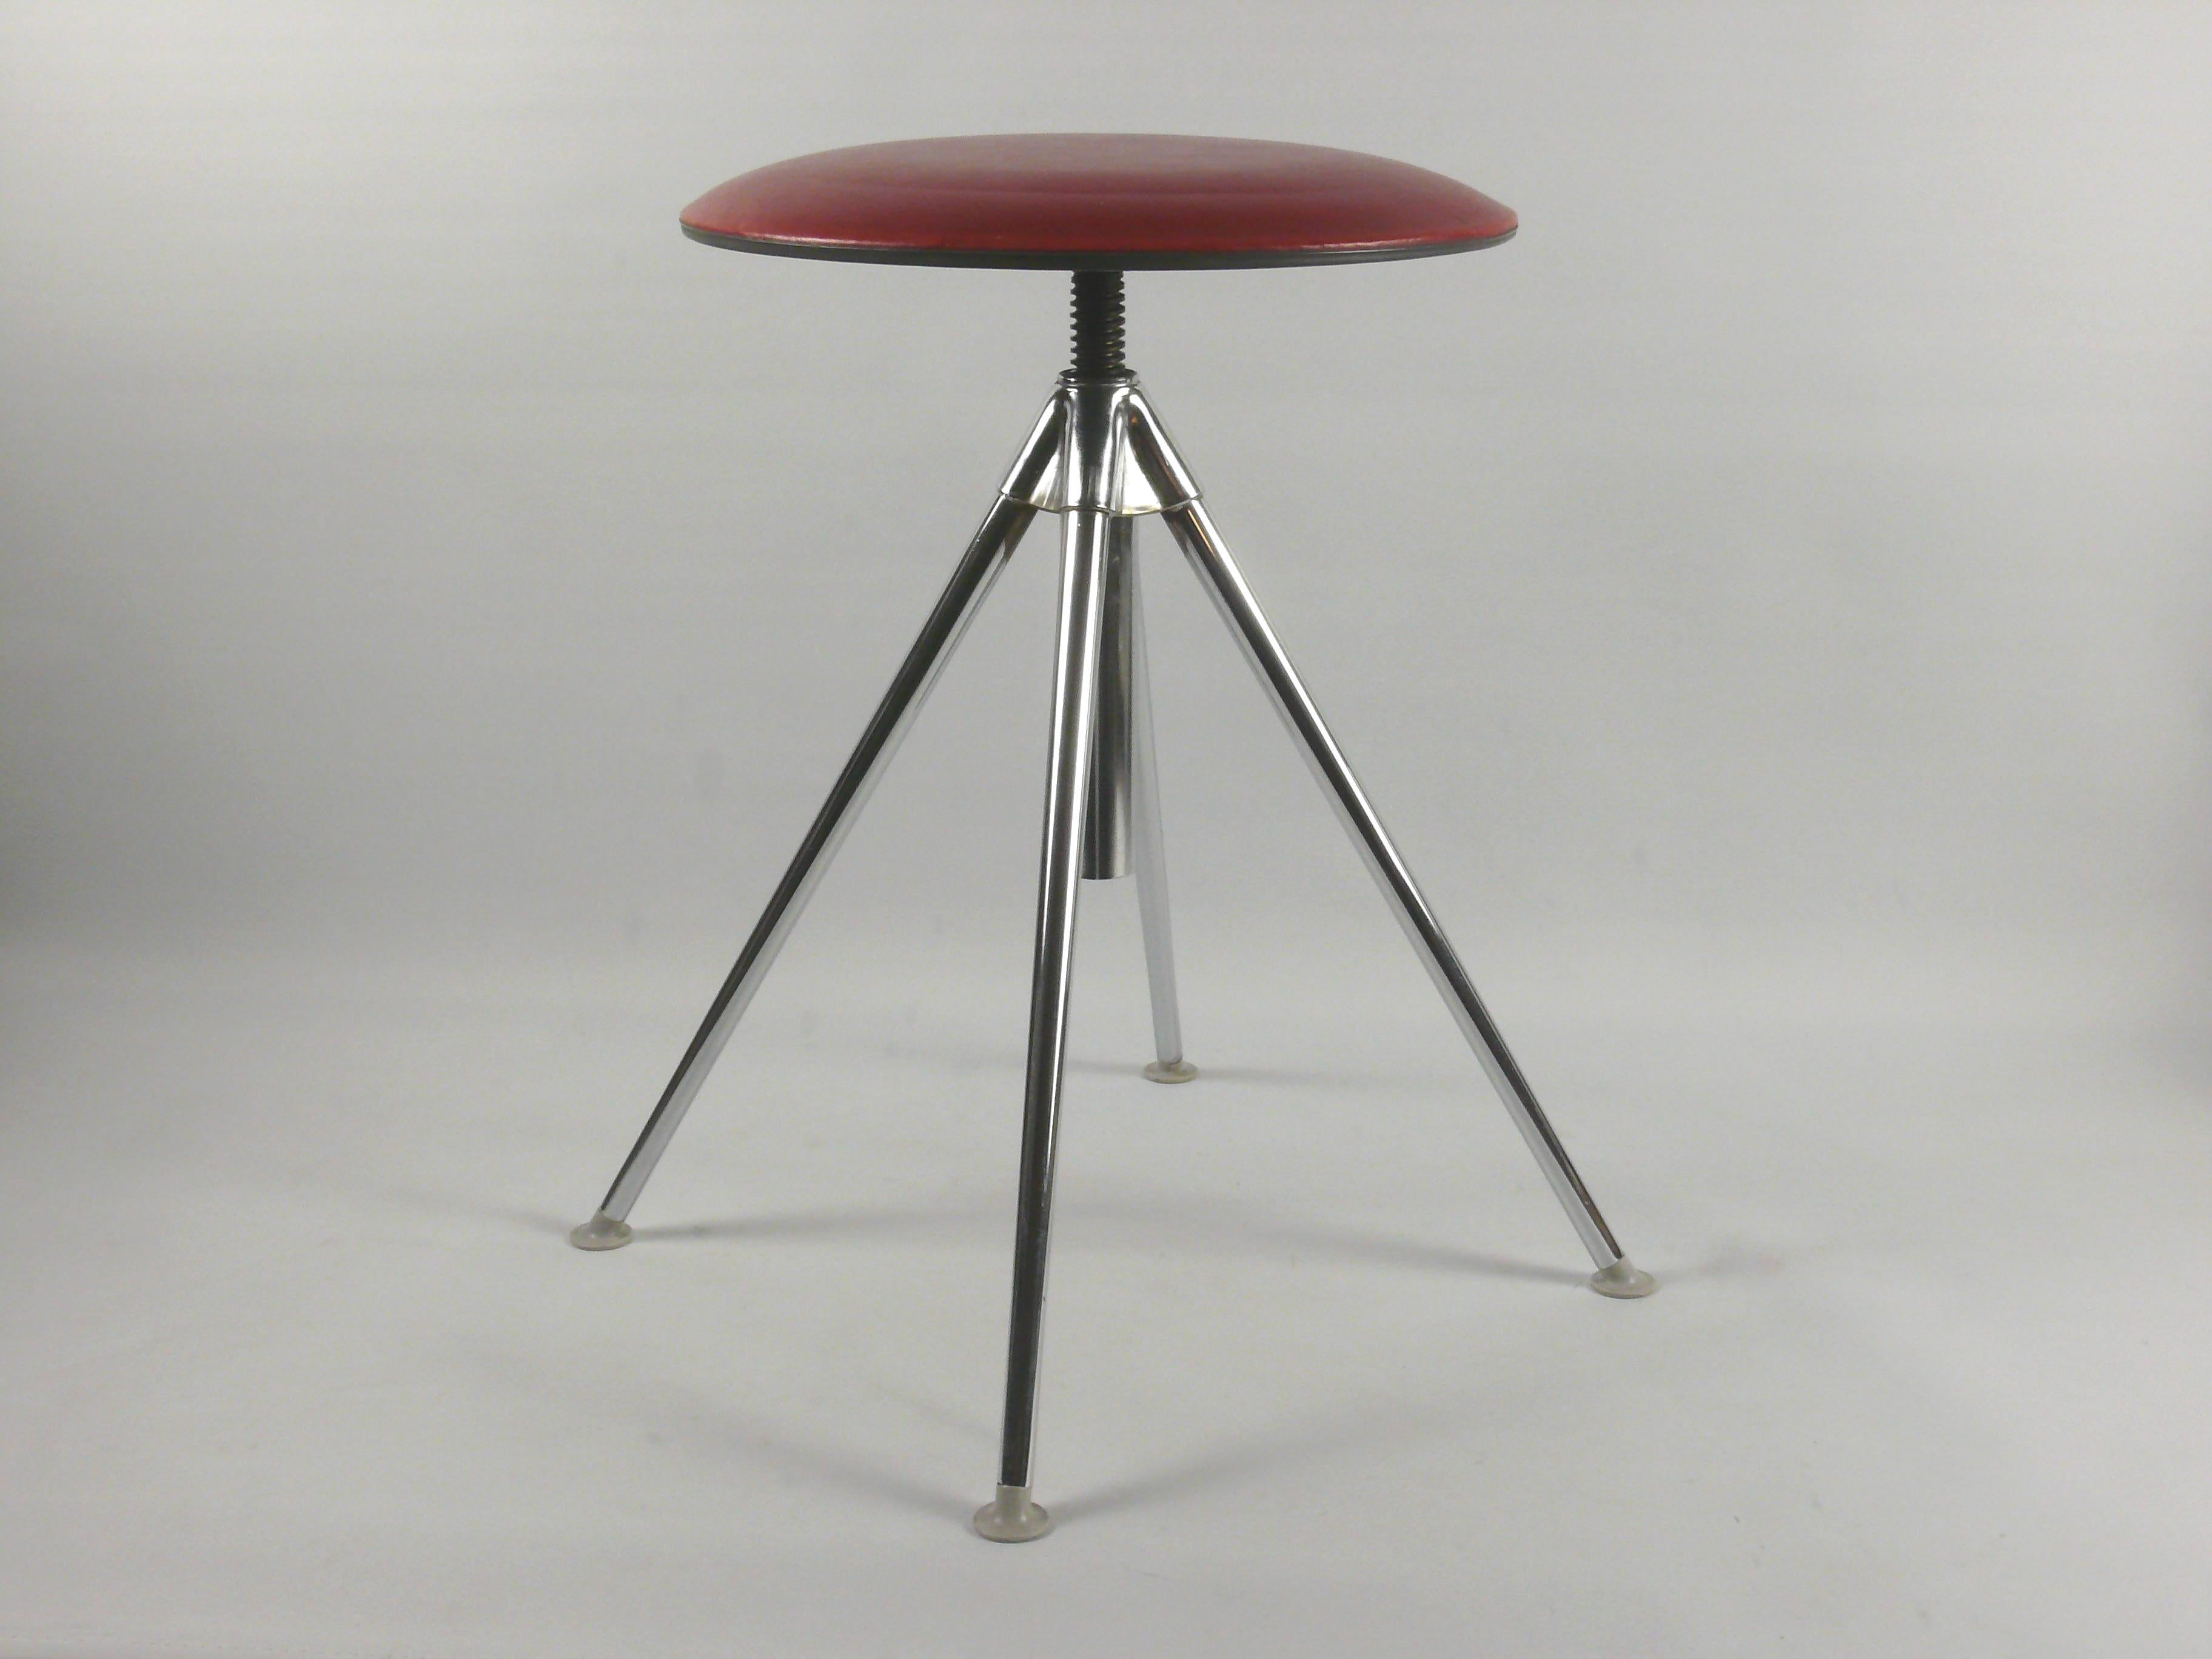 Very well preserved swivel stool/kitchen stool from the 1960s with a steel spindle for height adjustment: The stool stands on 4 tapered chrome-plated metal legs, which are held by a cast molding that also accommodates the metal spindle. The seat